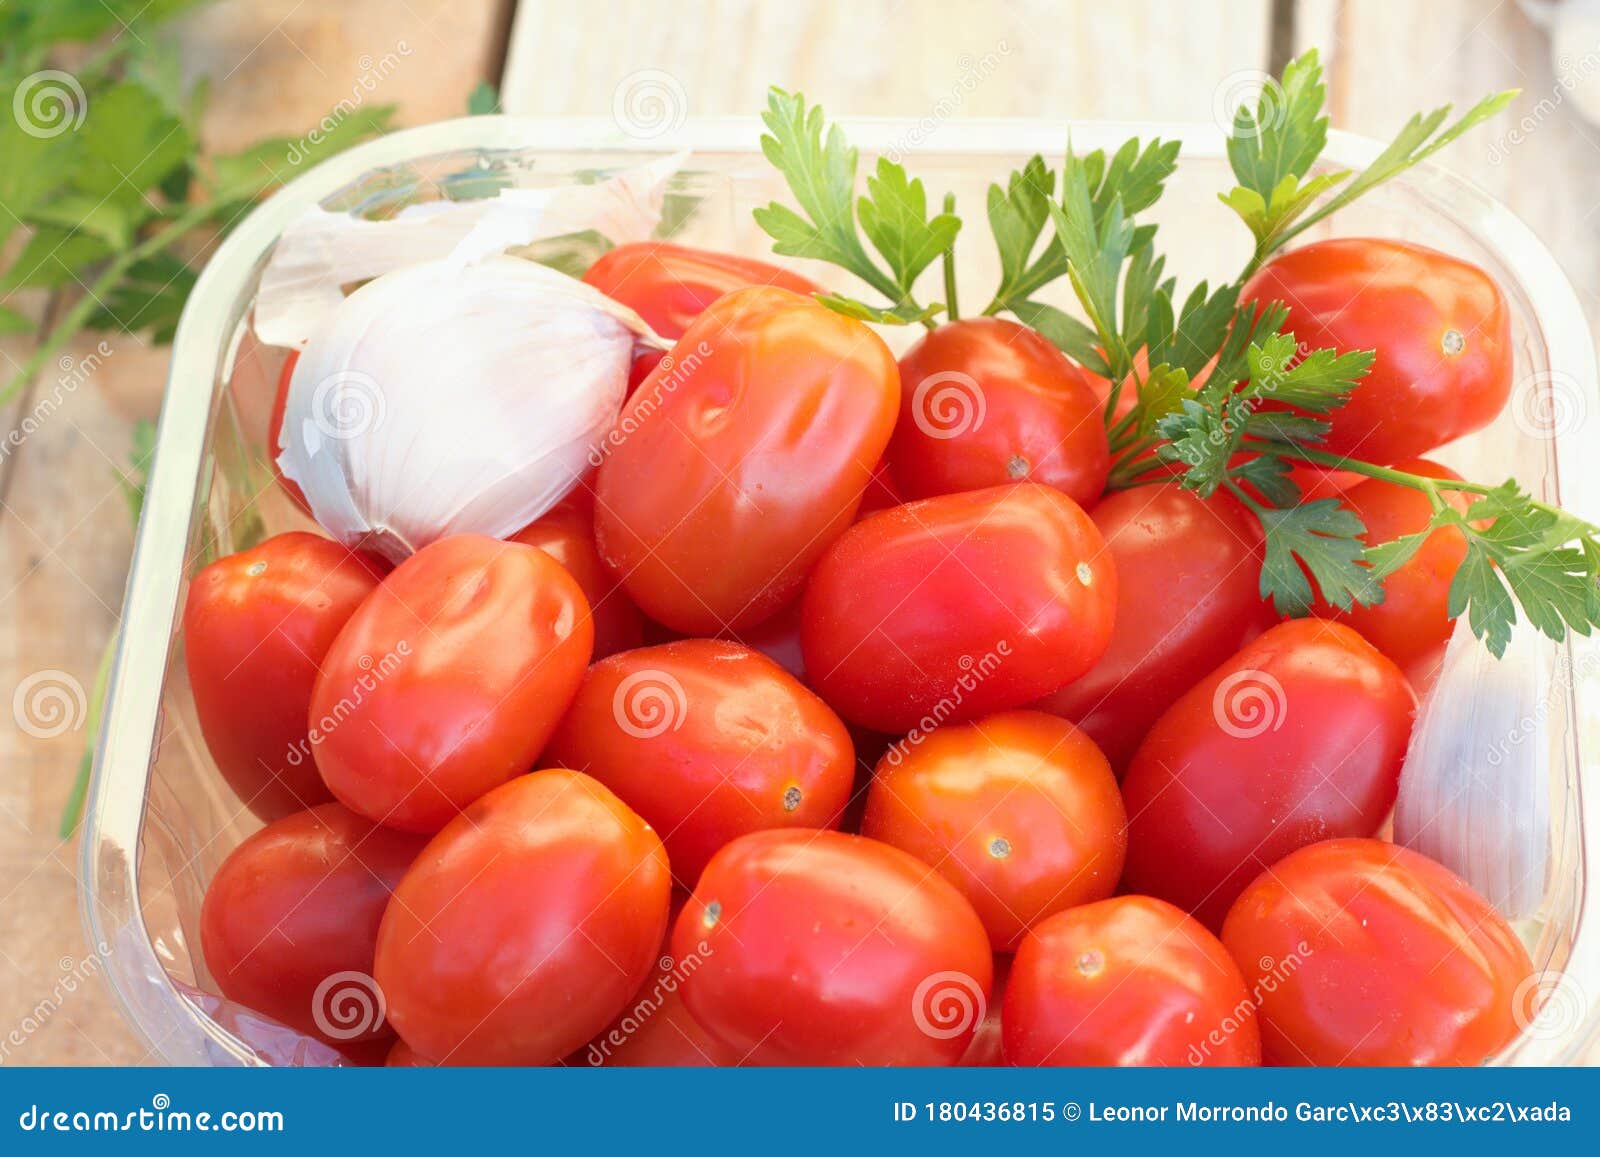 photograph of comer and tomatoes tomatoes in a bol.